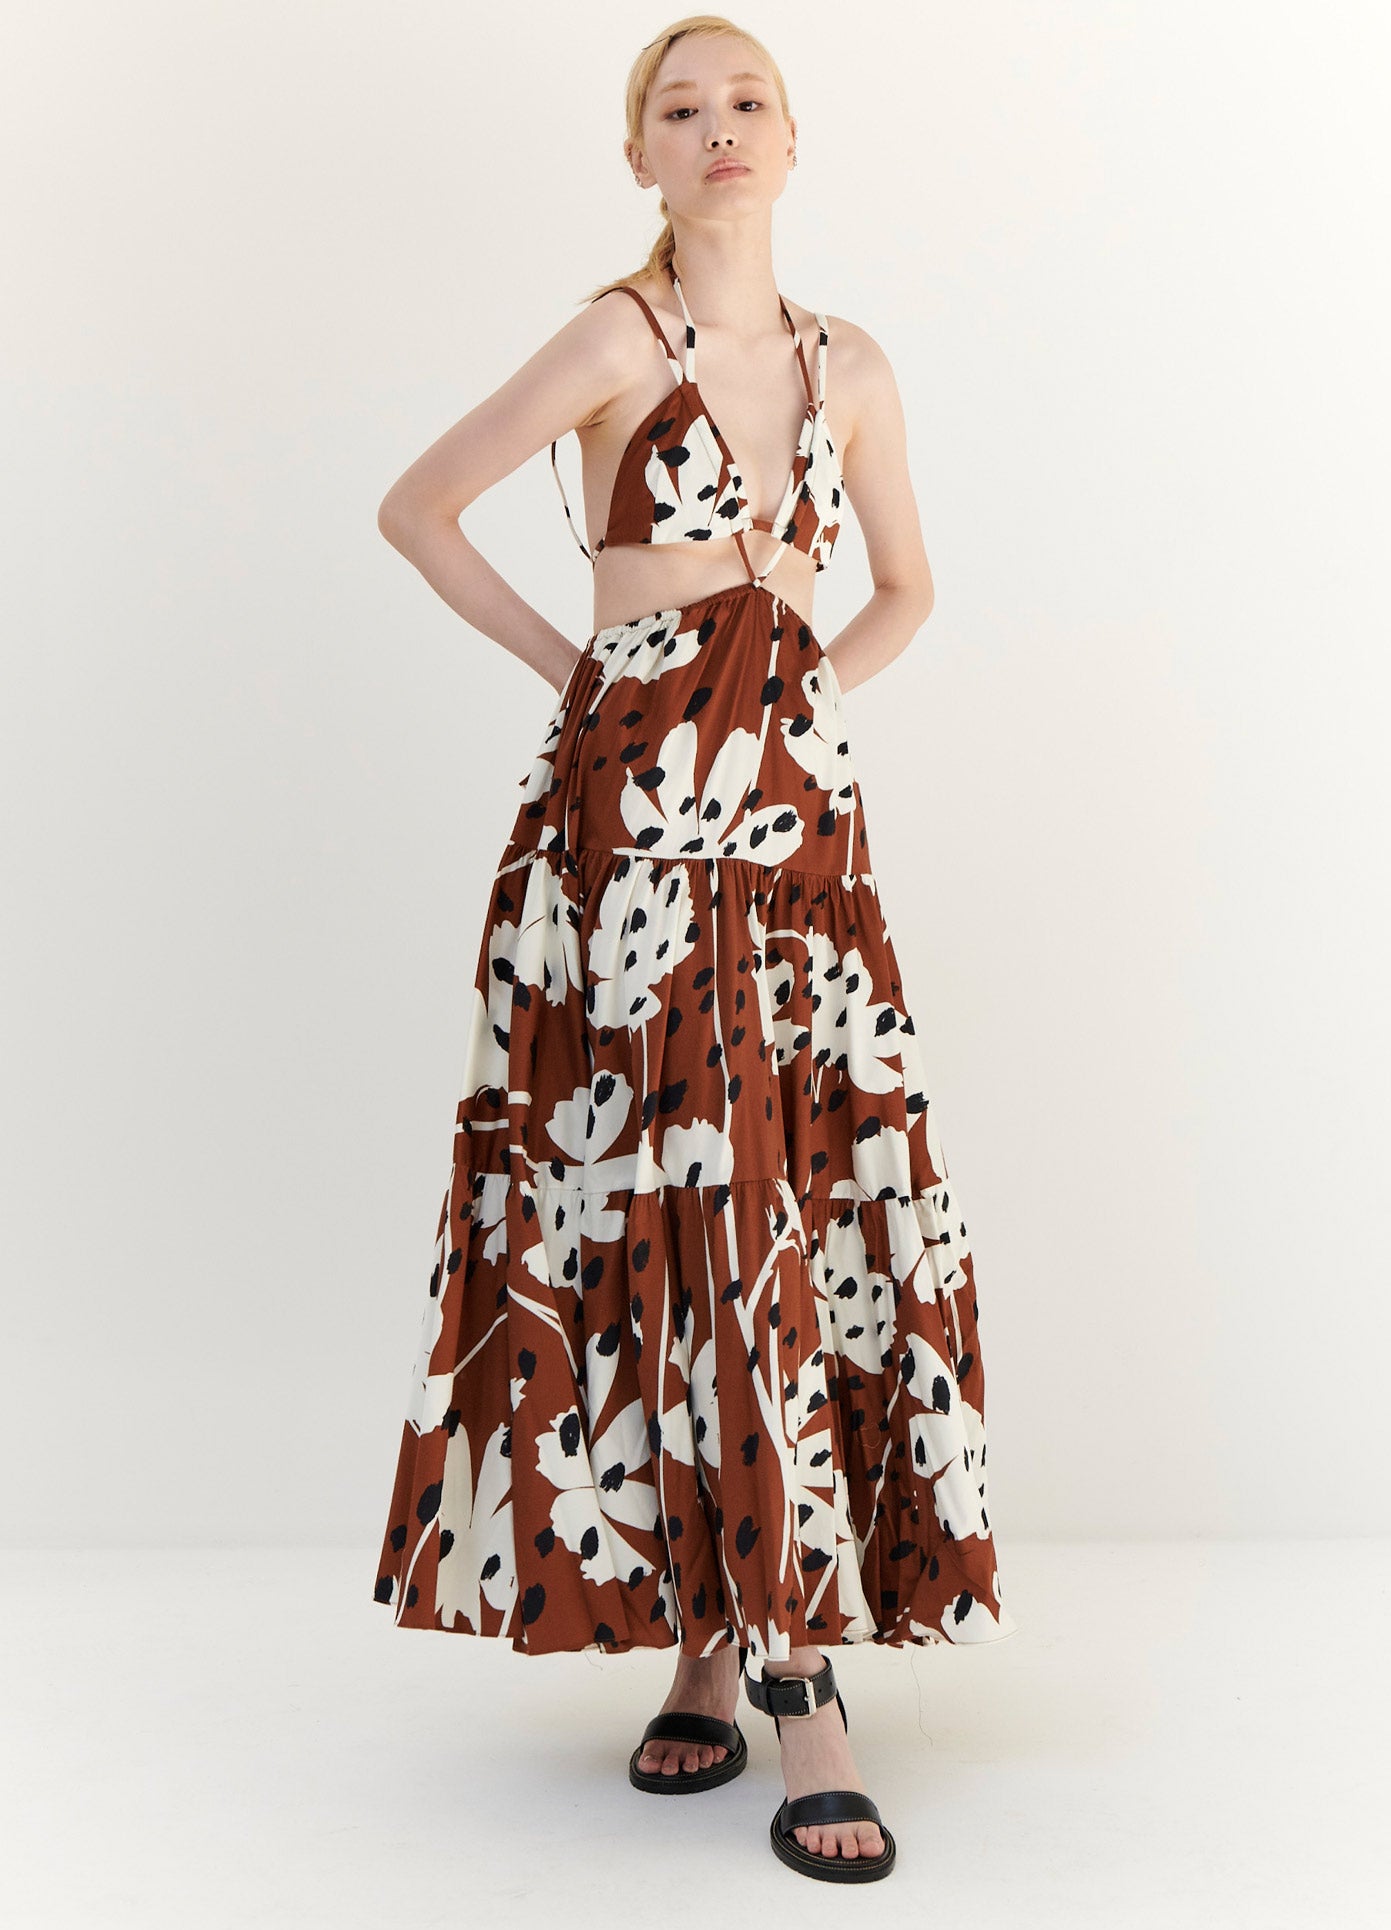 MONSE Floral Print Bra Detail Maxi Dress in Brown Multi on Model With Arms Behind Her Back Full Front View